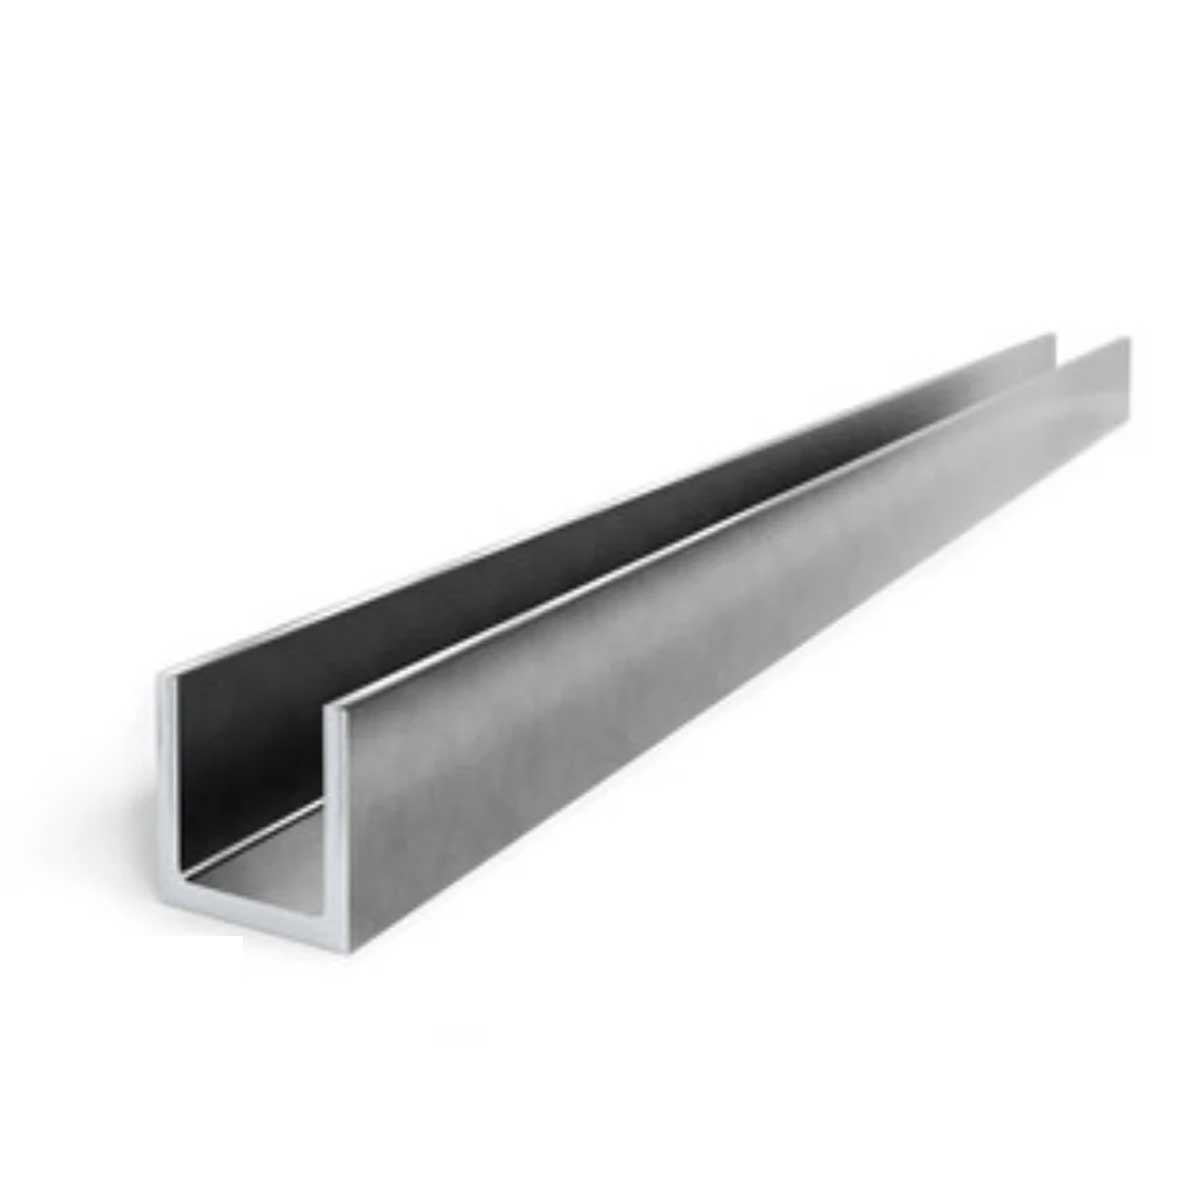 10mm Aluminium U Channel Manufacturers, Suppliers in Anand